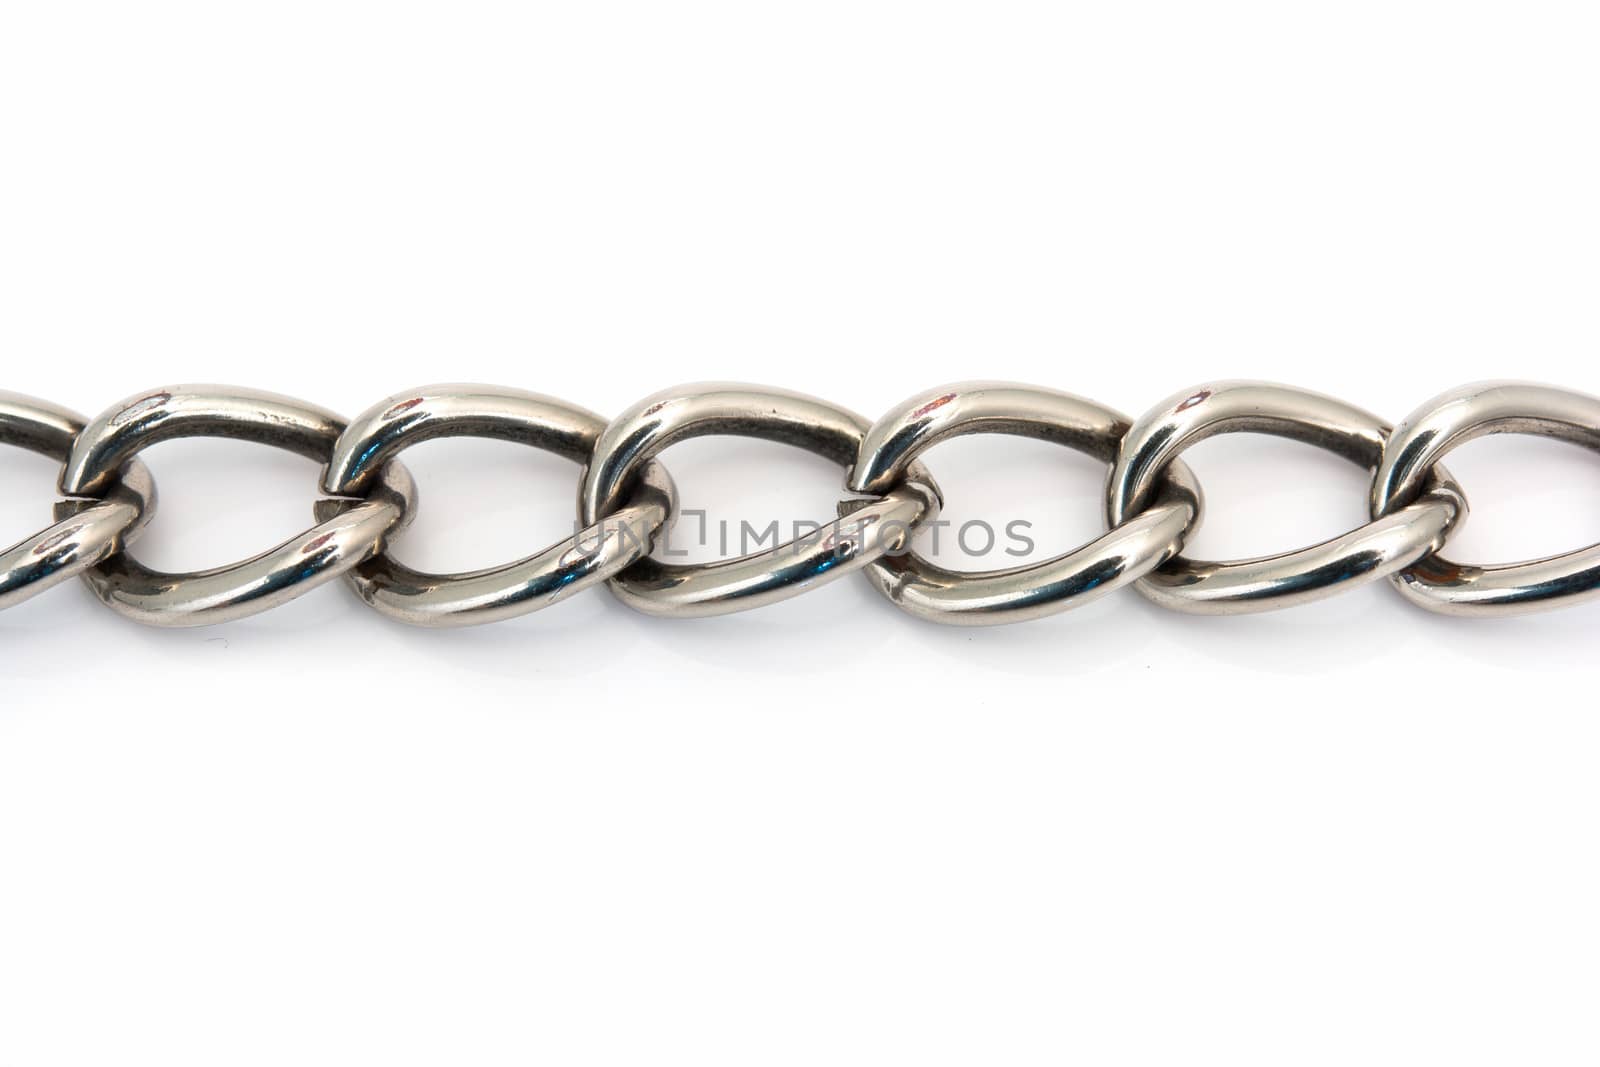 closeup of a metal chain link segment on white background